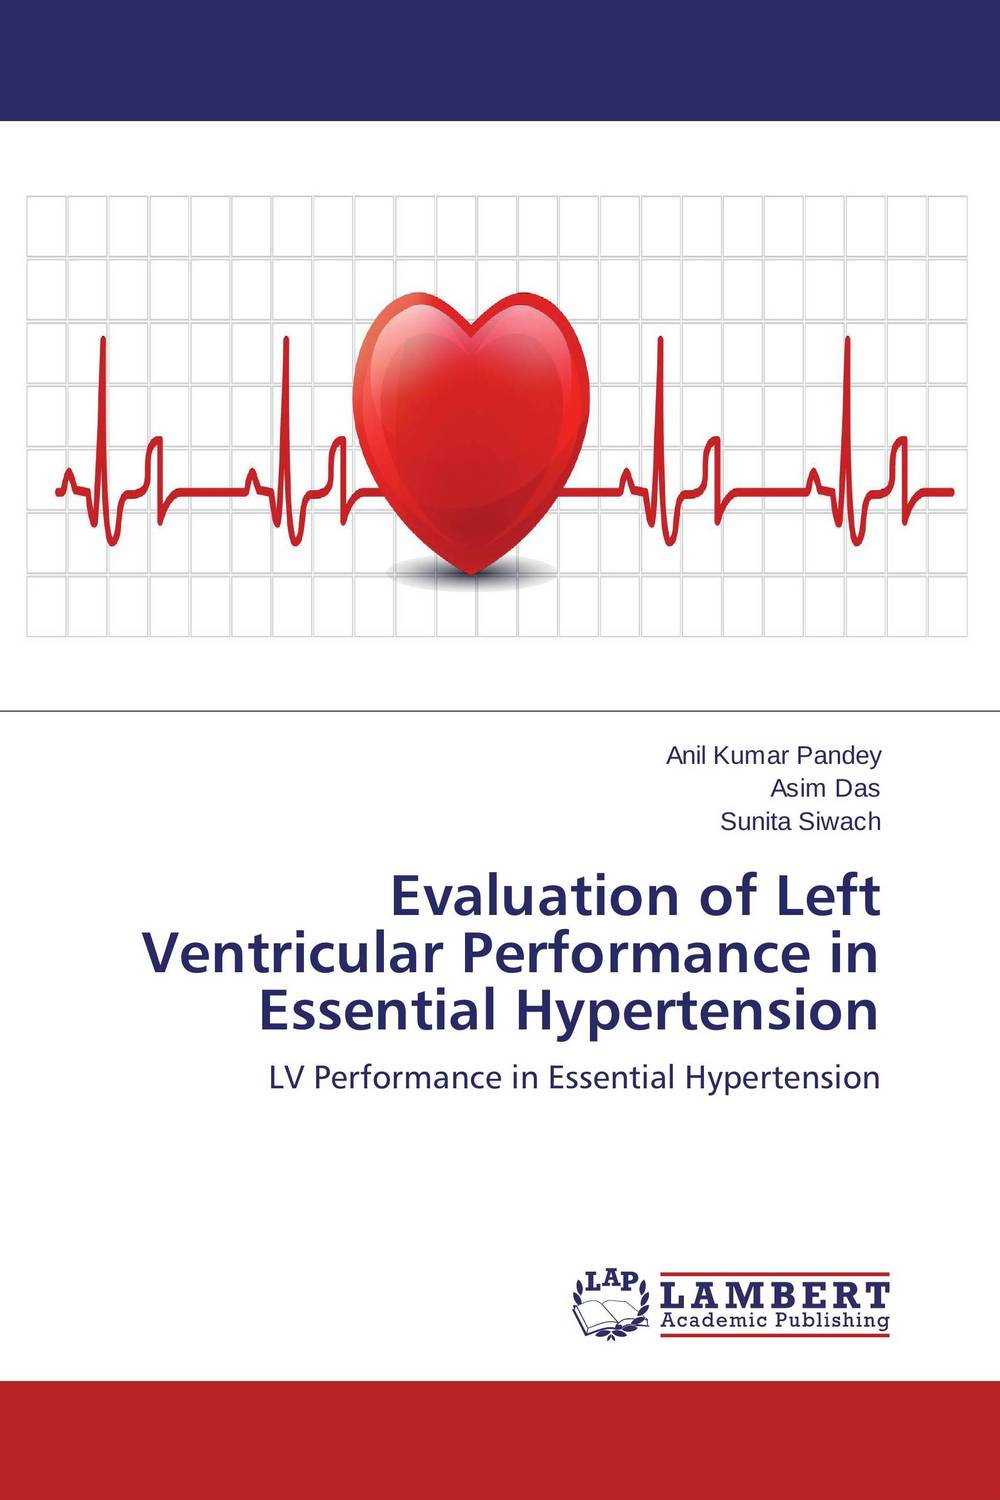 Evaluation of Left Ventricular Performance in Essential Hypertension